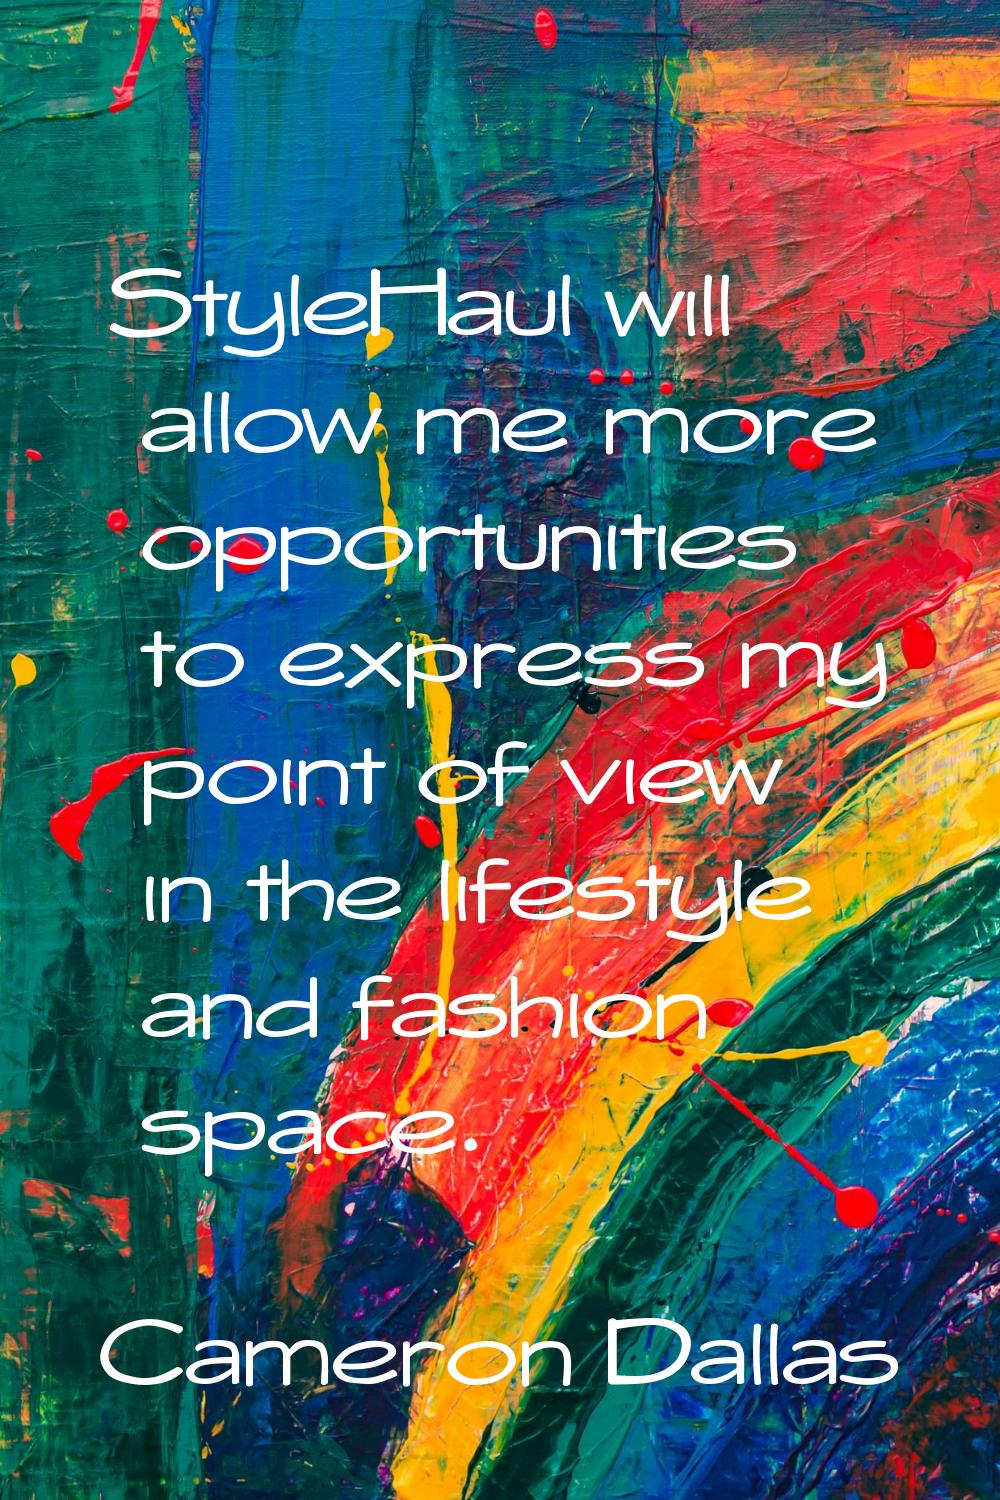 StyleHaul will allow me more opportunities to express my point of view in the lifestyle and fashion